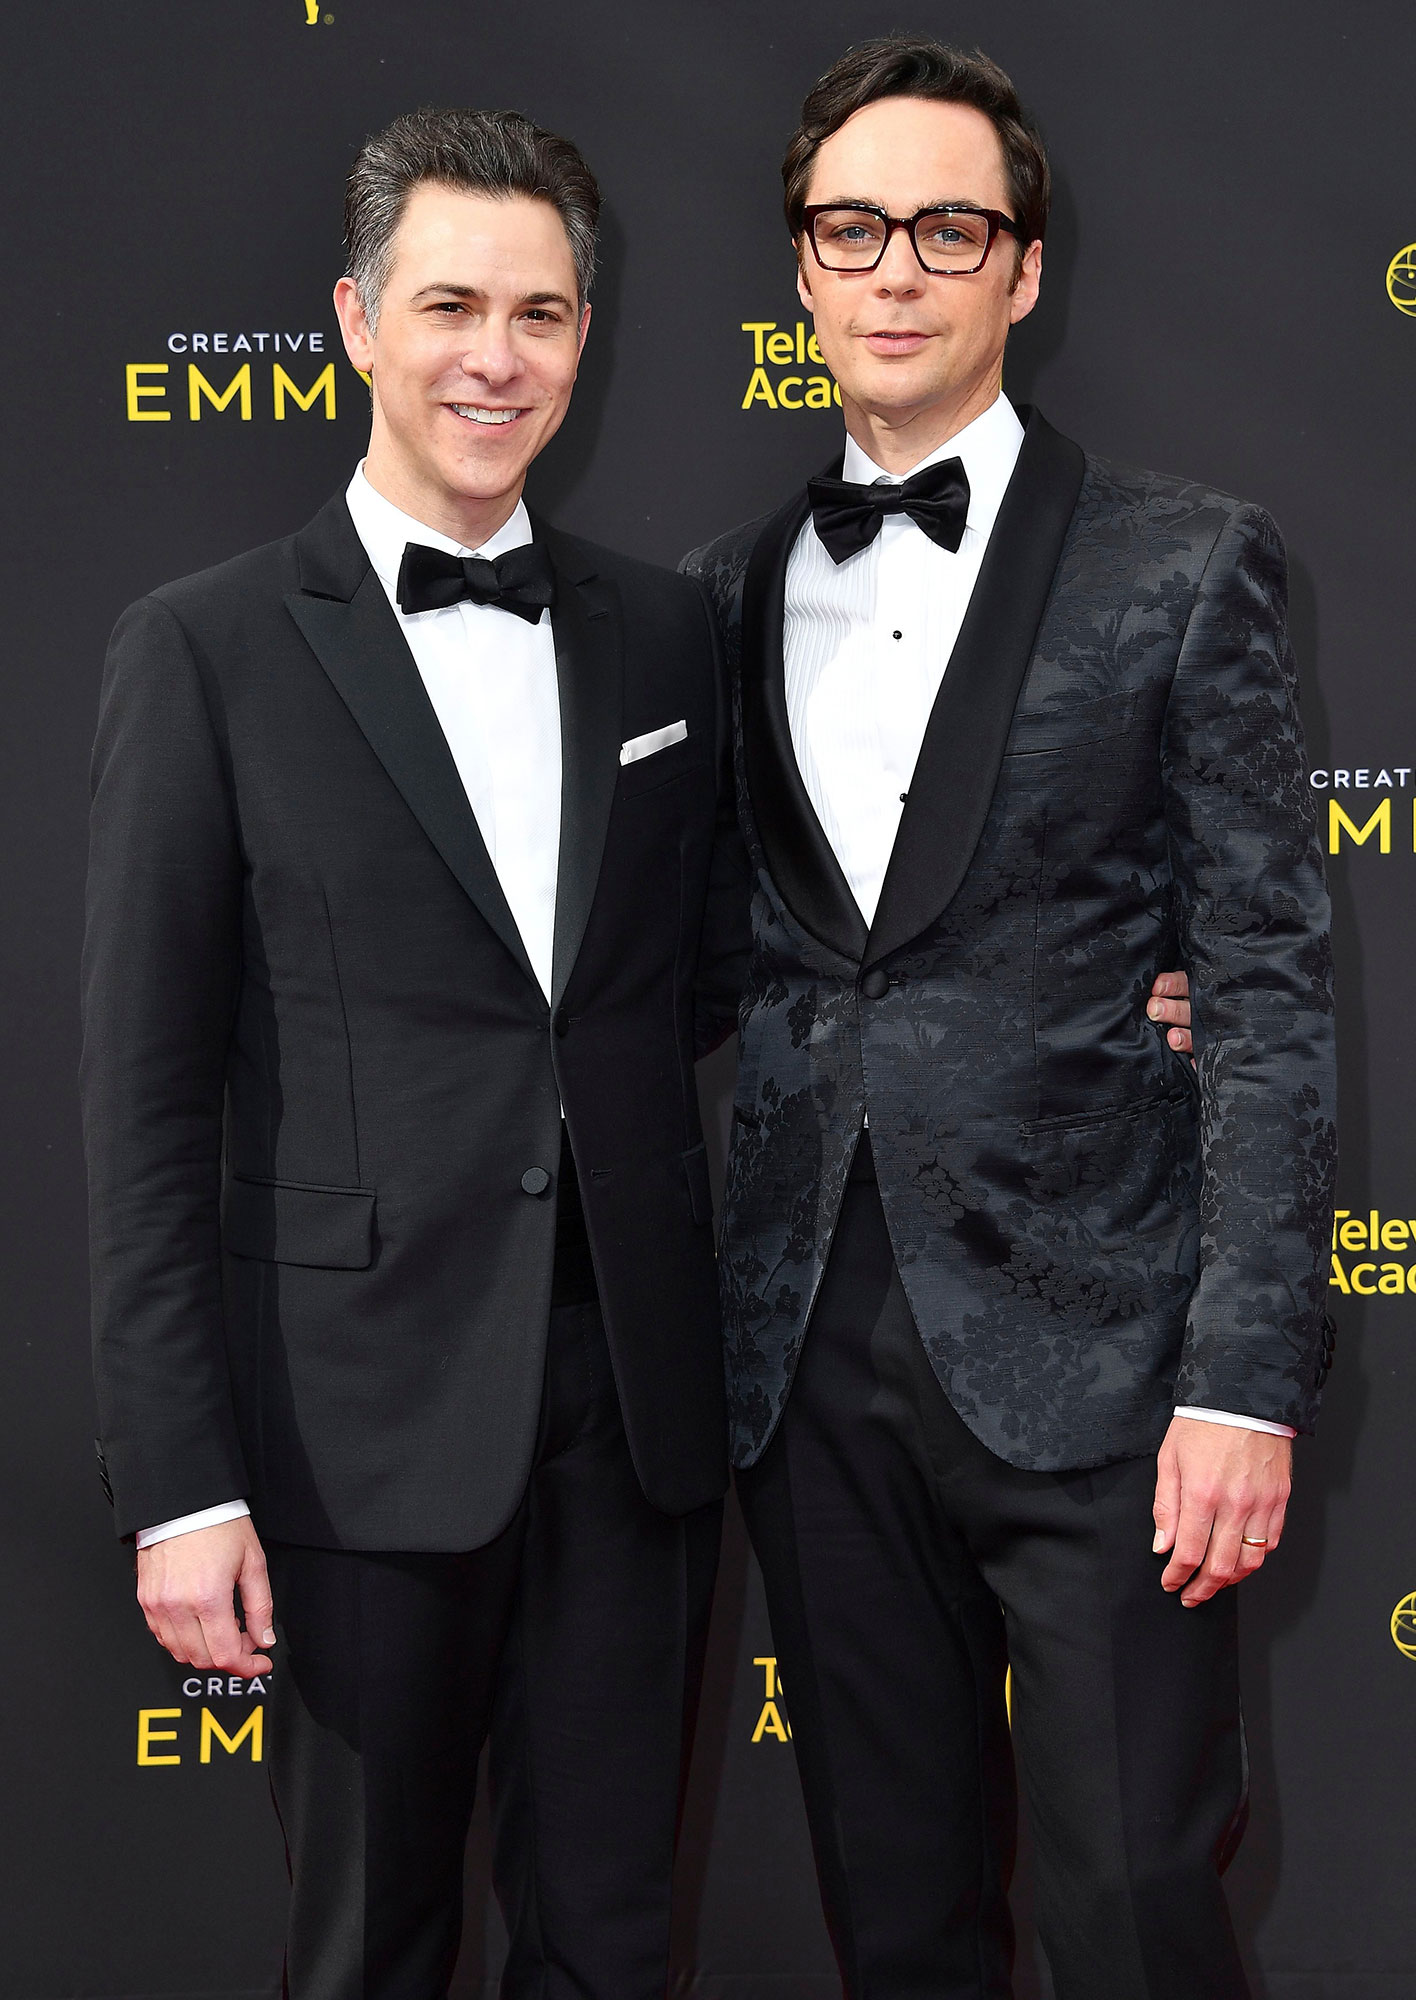 Is Jim Parsons Married To Todd Spiewak? Net worth, biography and age